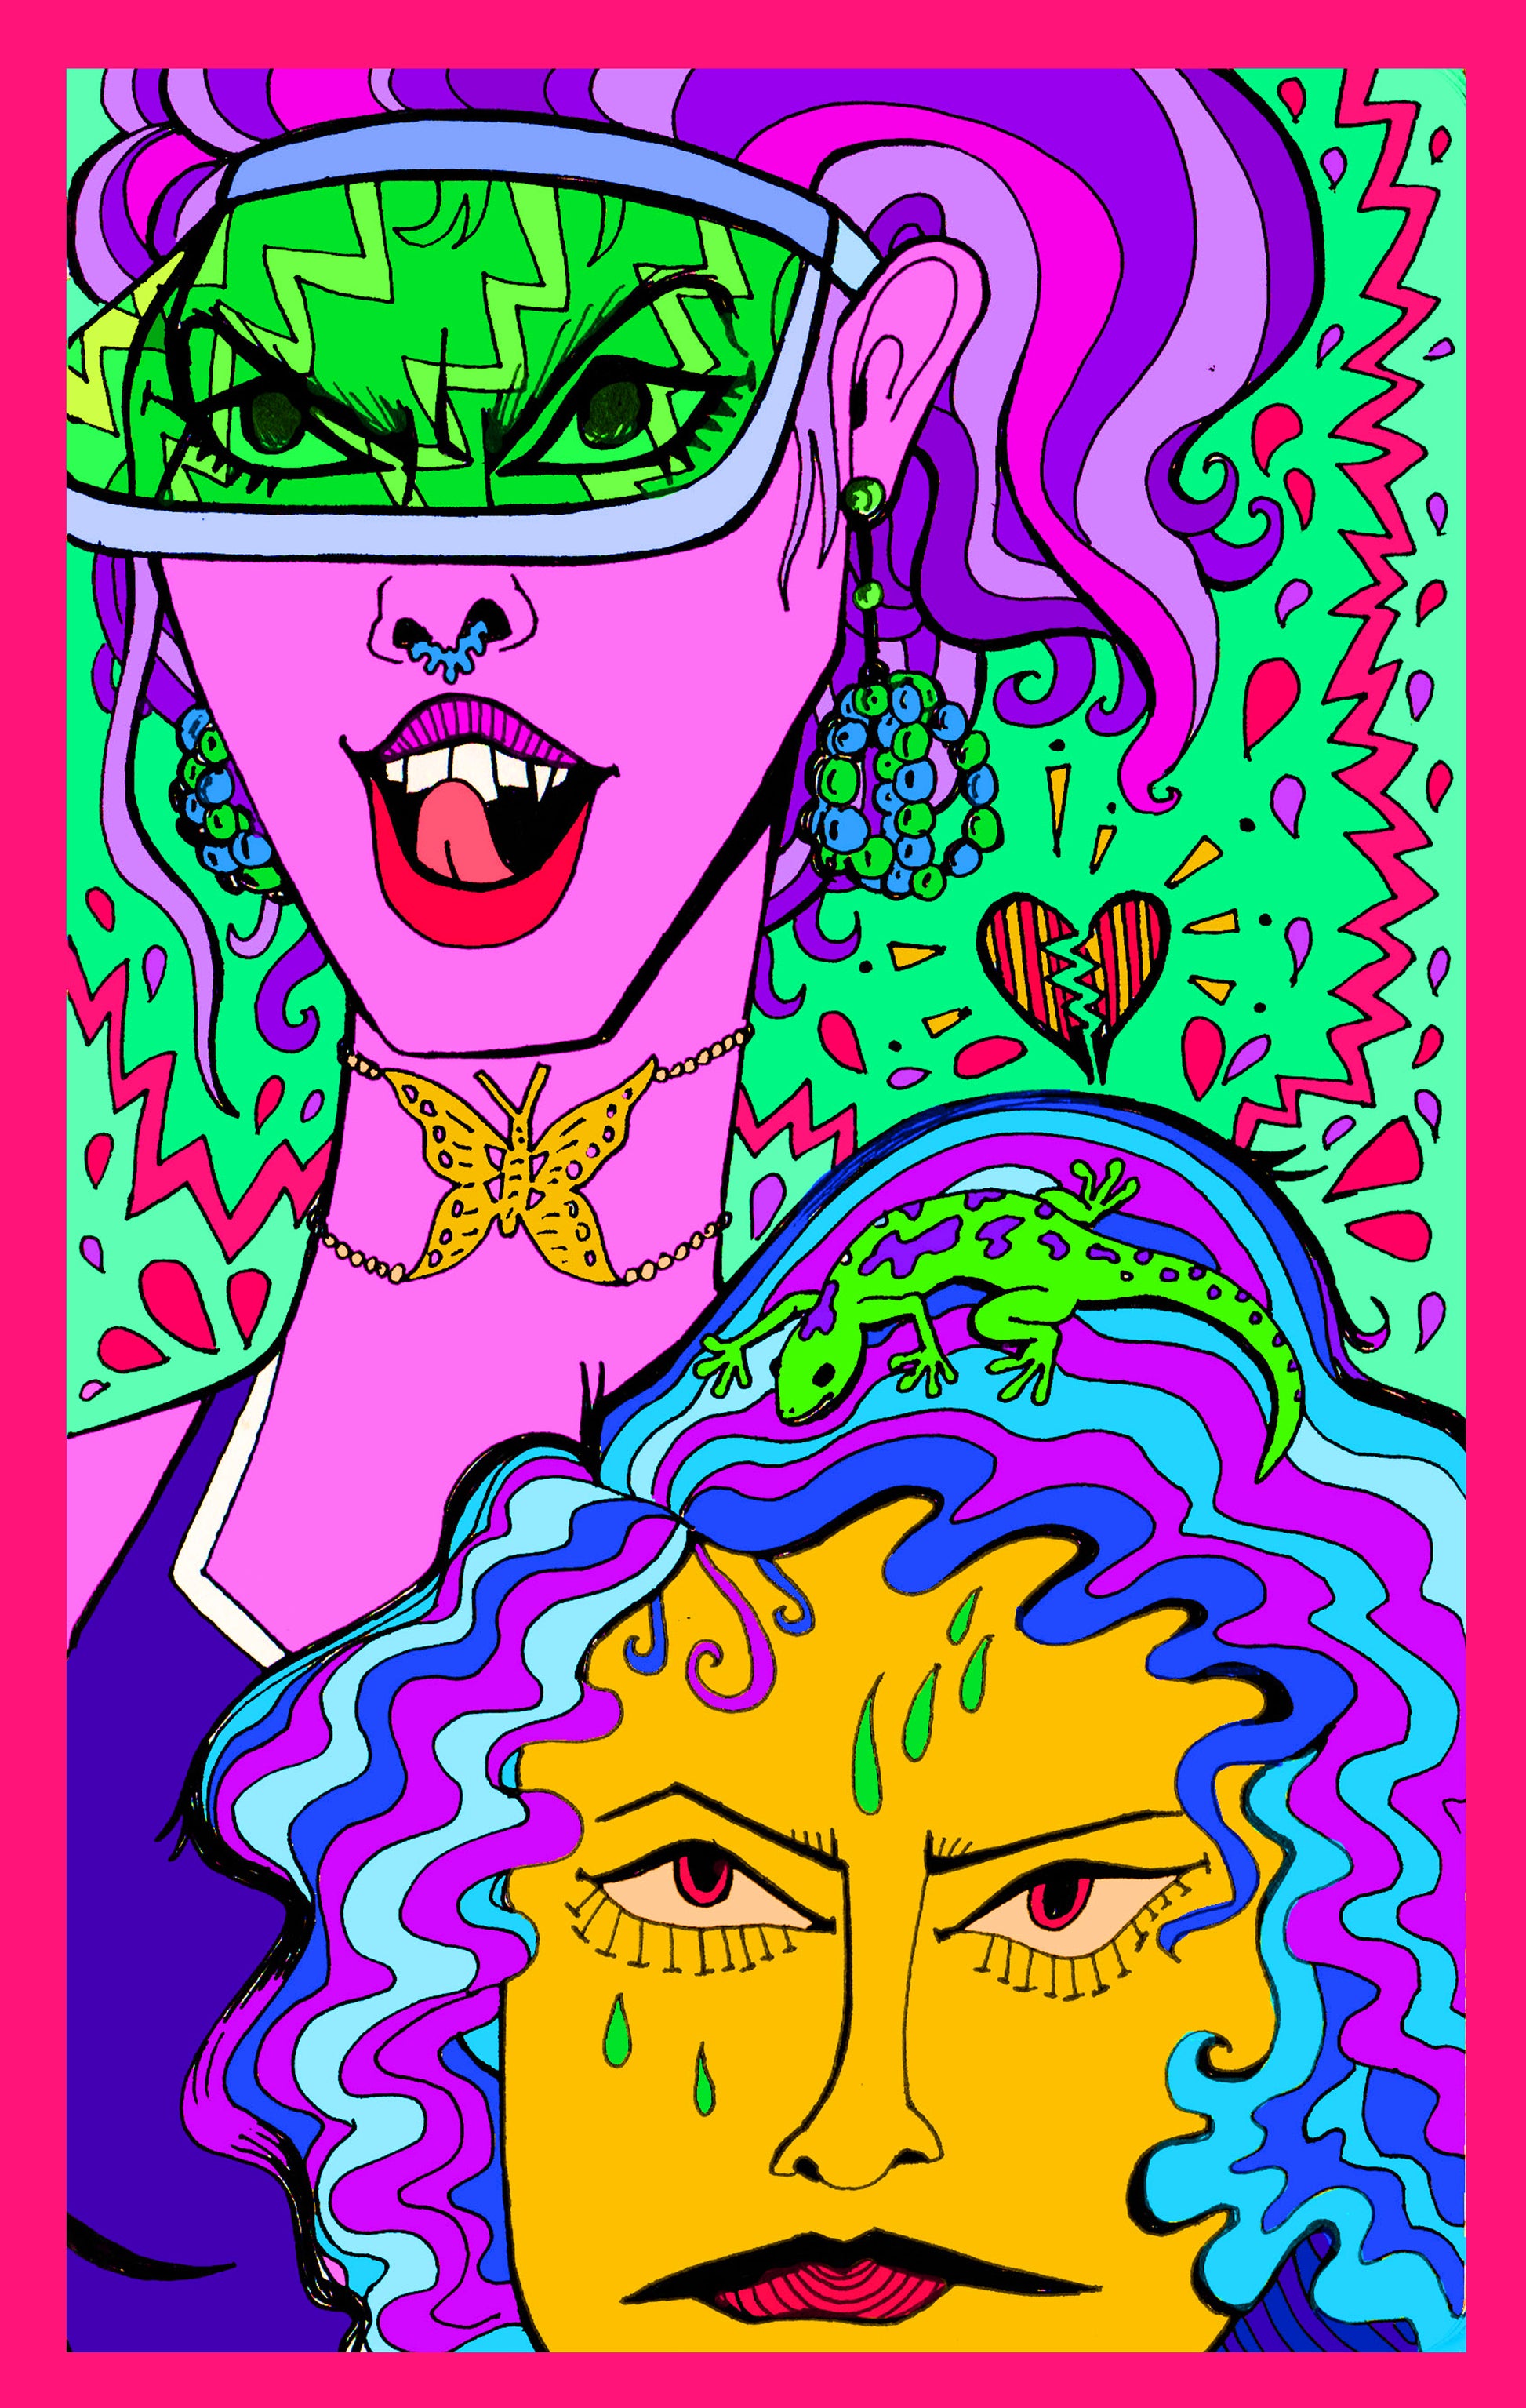 a vibrant and colorful illustration of two ladies, one wearing a neon green visor, beaded earrings and a butterfly chocker - the other with a lizard on her head and dripping with some water. Wow! 